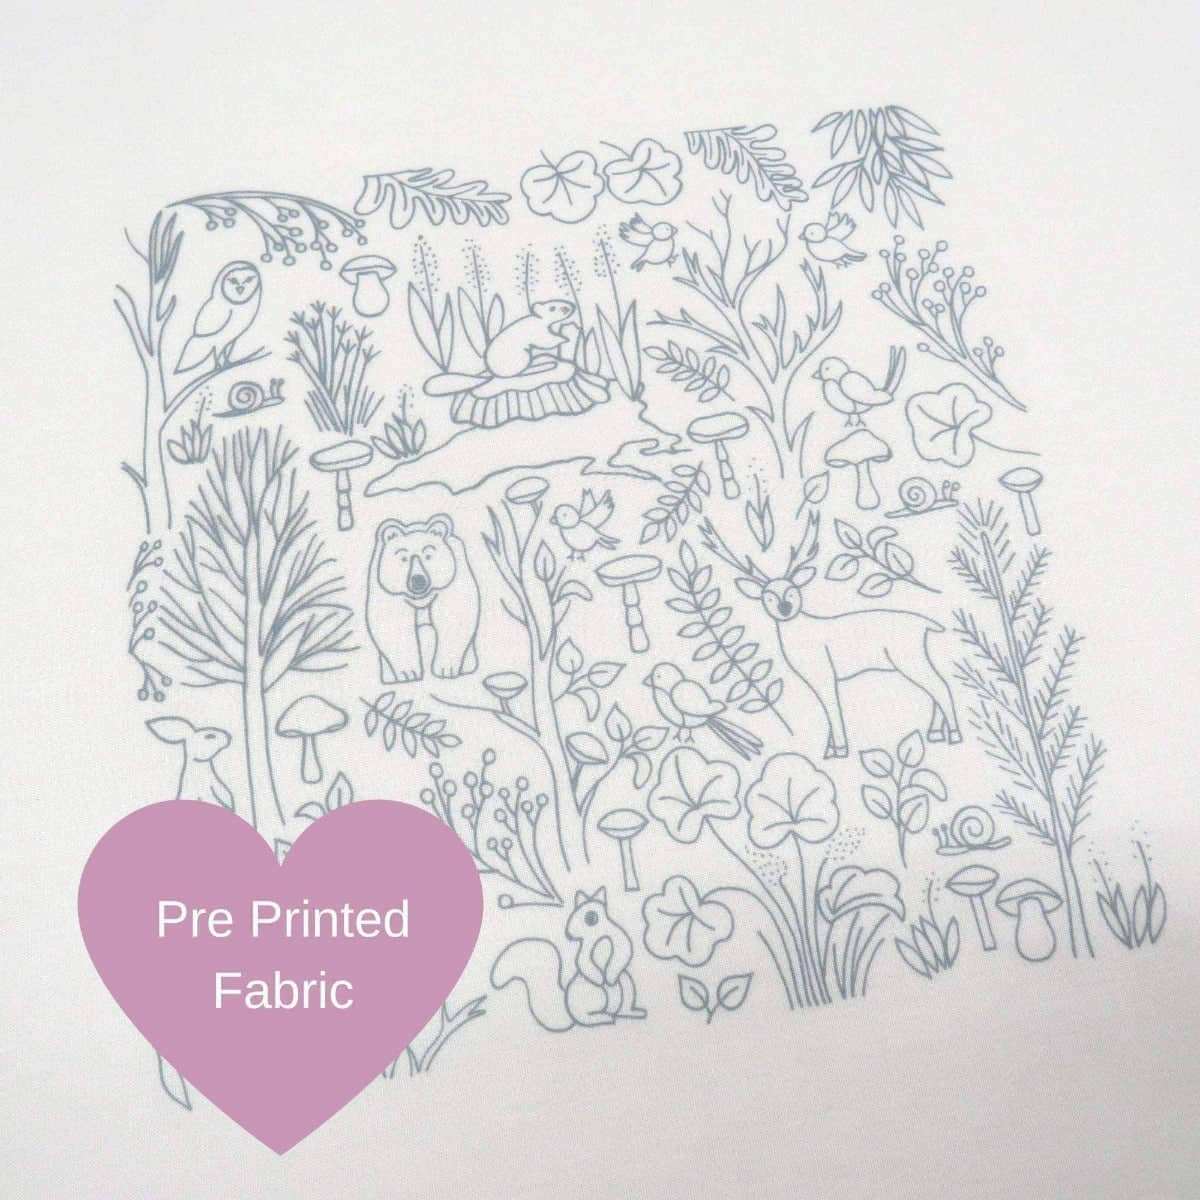 Into the Forest, Pre Printed Embroidery Fabric Panel PLUS PDF Pattern, Pre Printed Fabric Pattern, StitchDoodles, bird embroidery, Embroidery, embroidery hoop, embroidery hoop kit, embroidery kit for adults, embroidery kit for beginers, embroidery kits for beginners, embroidery pattern, forest embroidery, hand embroidery, hand embroidery fabric, hand embroidery kit, hand embroidery seat frame, nurge embroidery hoop, PDF pattern, Printed Pattern, wildlife embroidery, StitchDoodles, shop.stitchdoodles.com